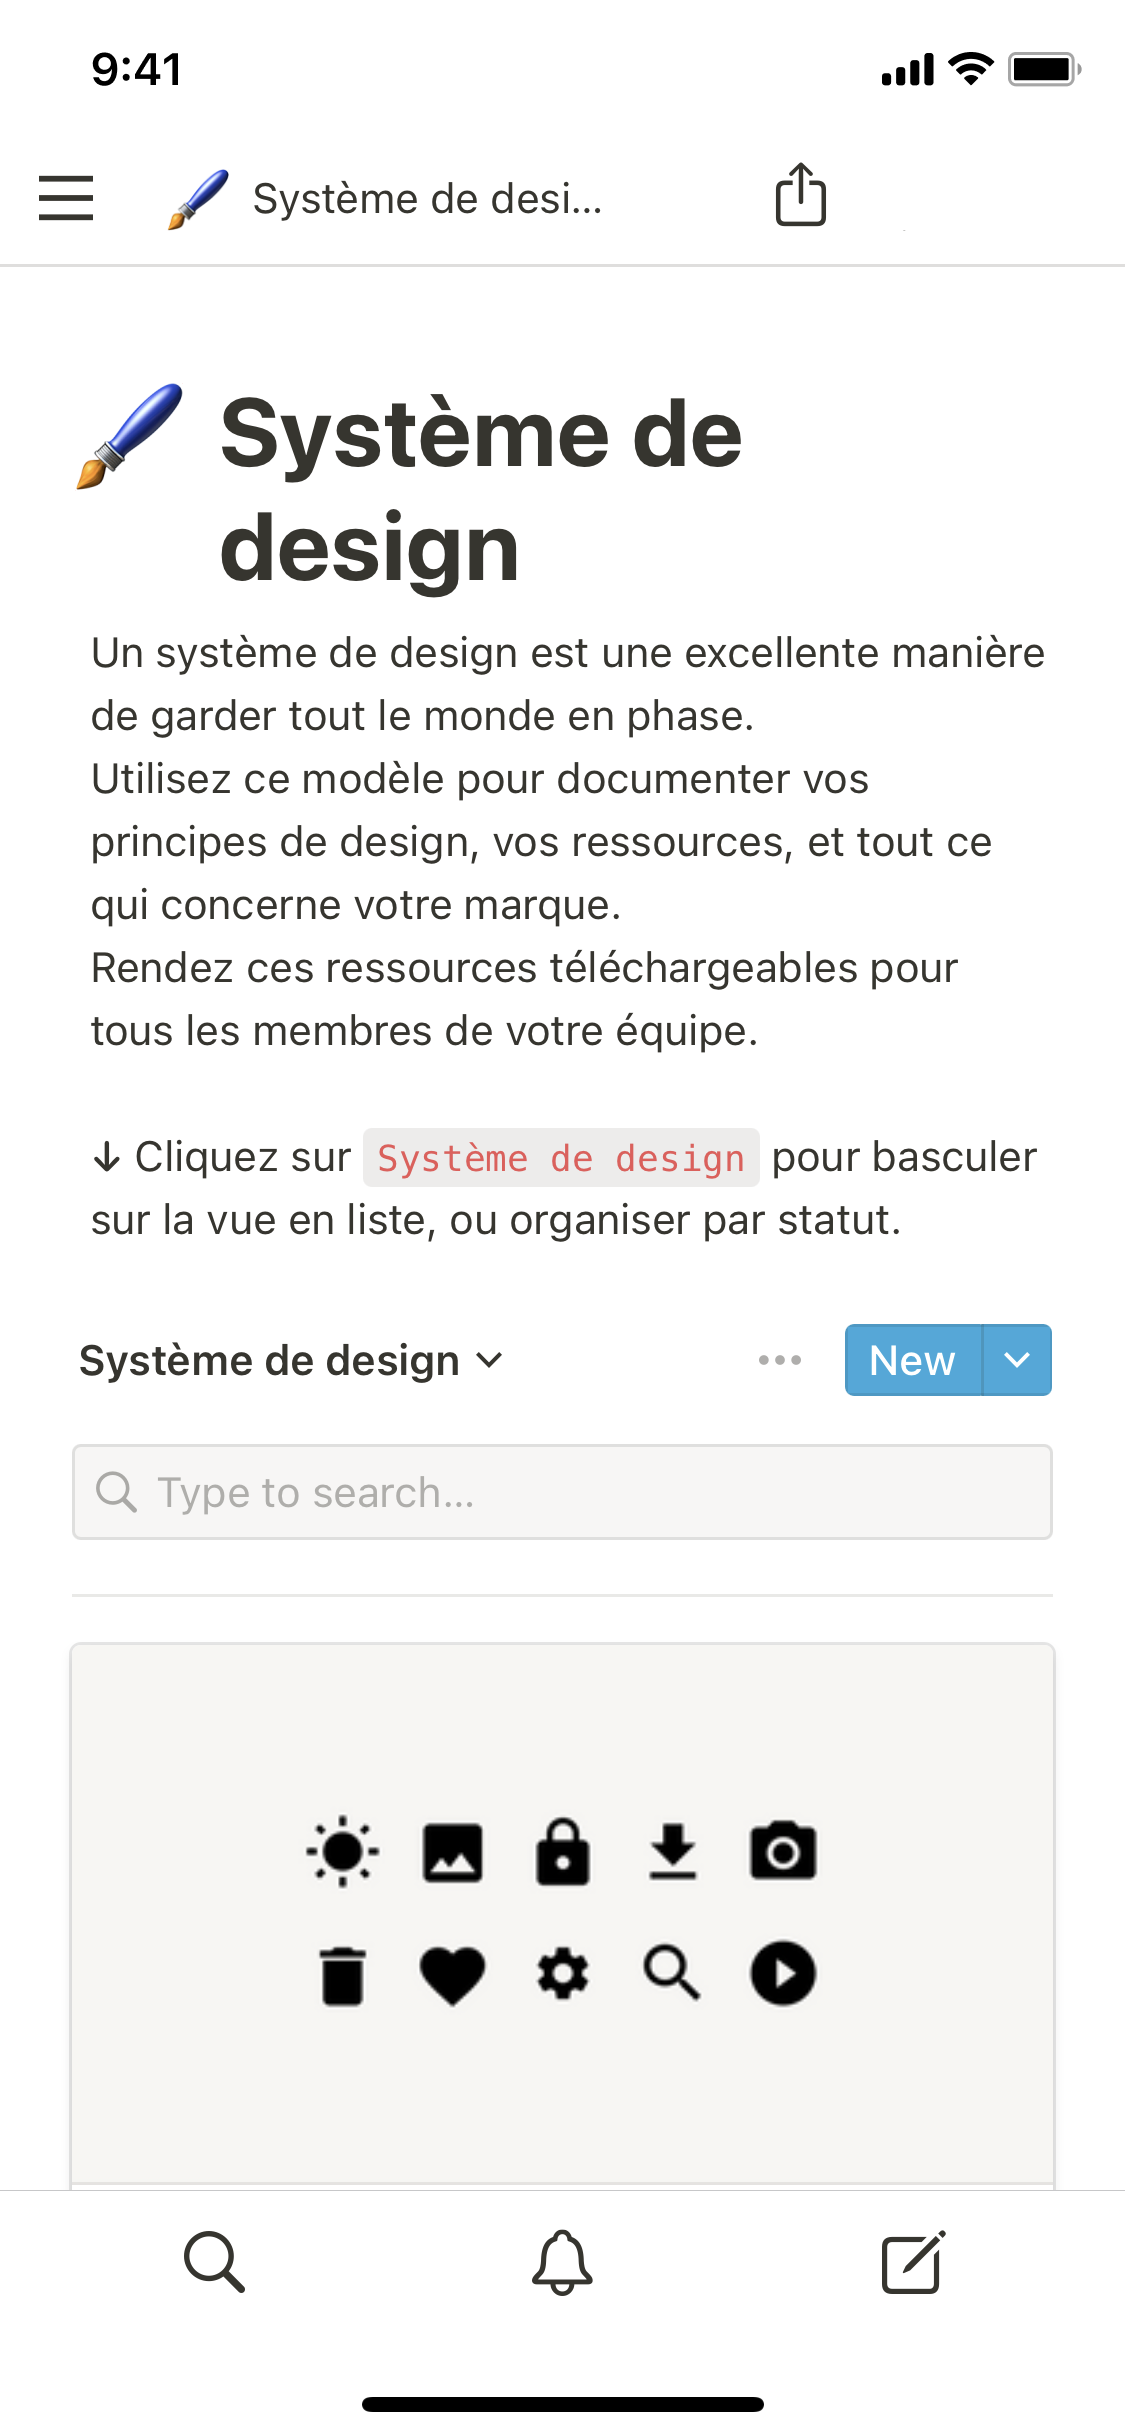 The mobile image for the Design system template